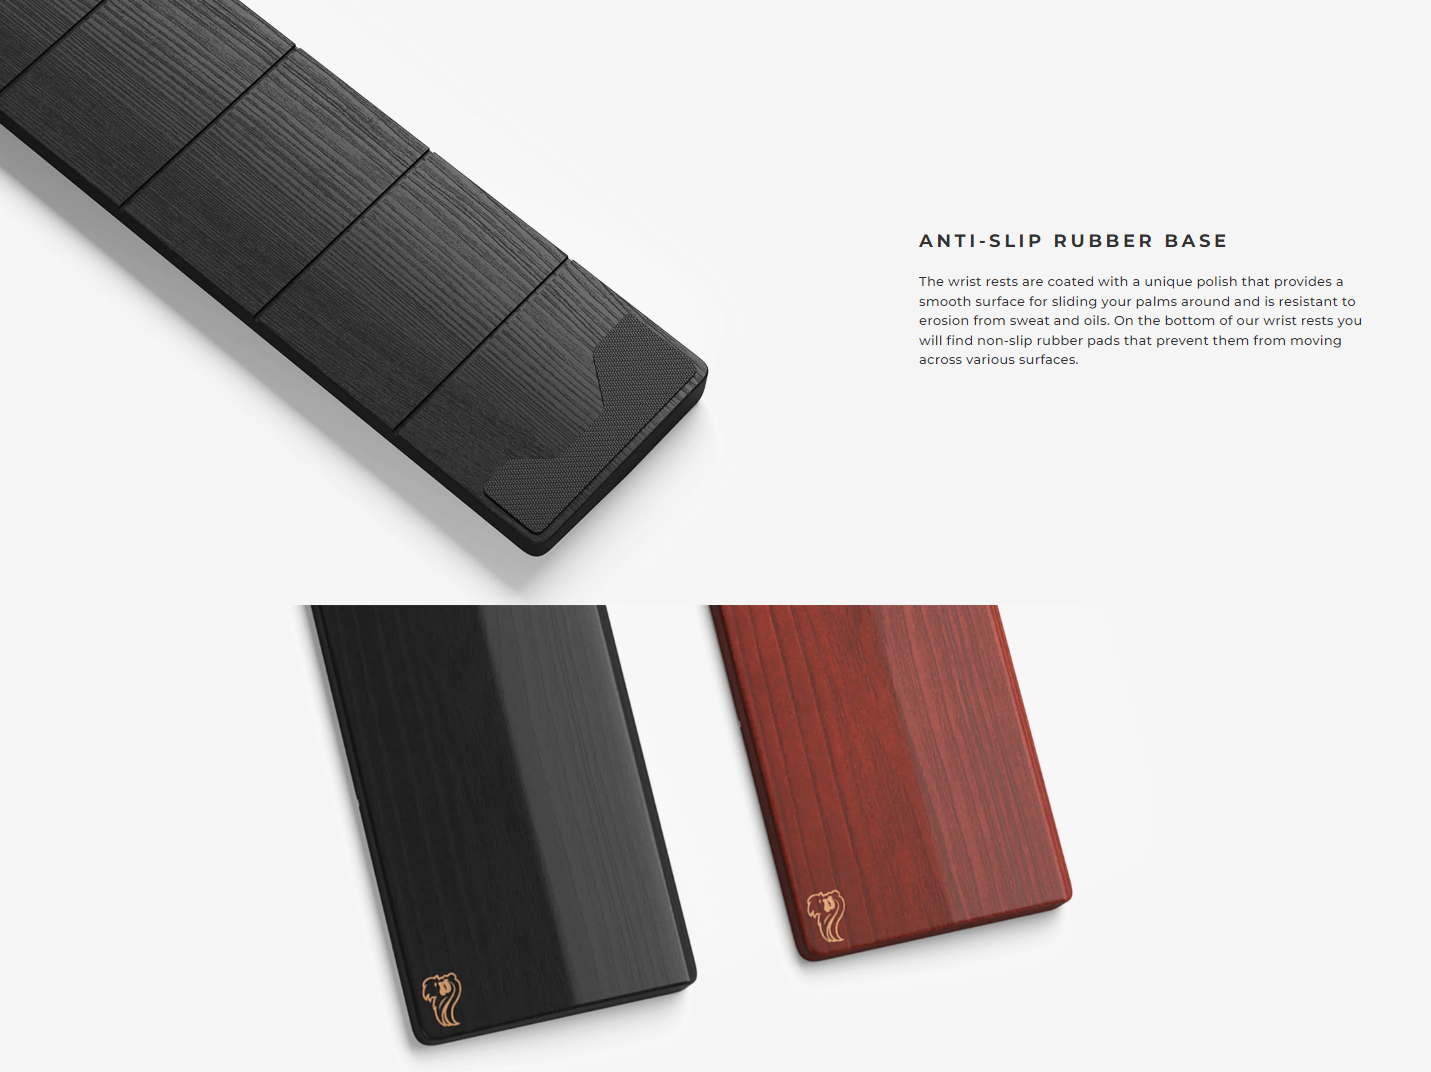 A large marketing image providing additional information about the product Glorious Wooden Keyboard Wrist Rest Compact - Onyx - Additional alt info not provided